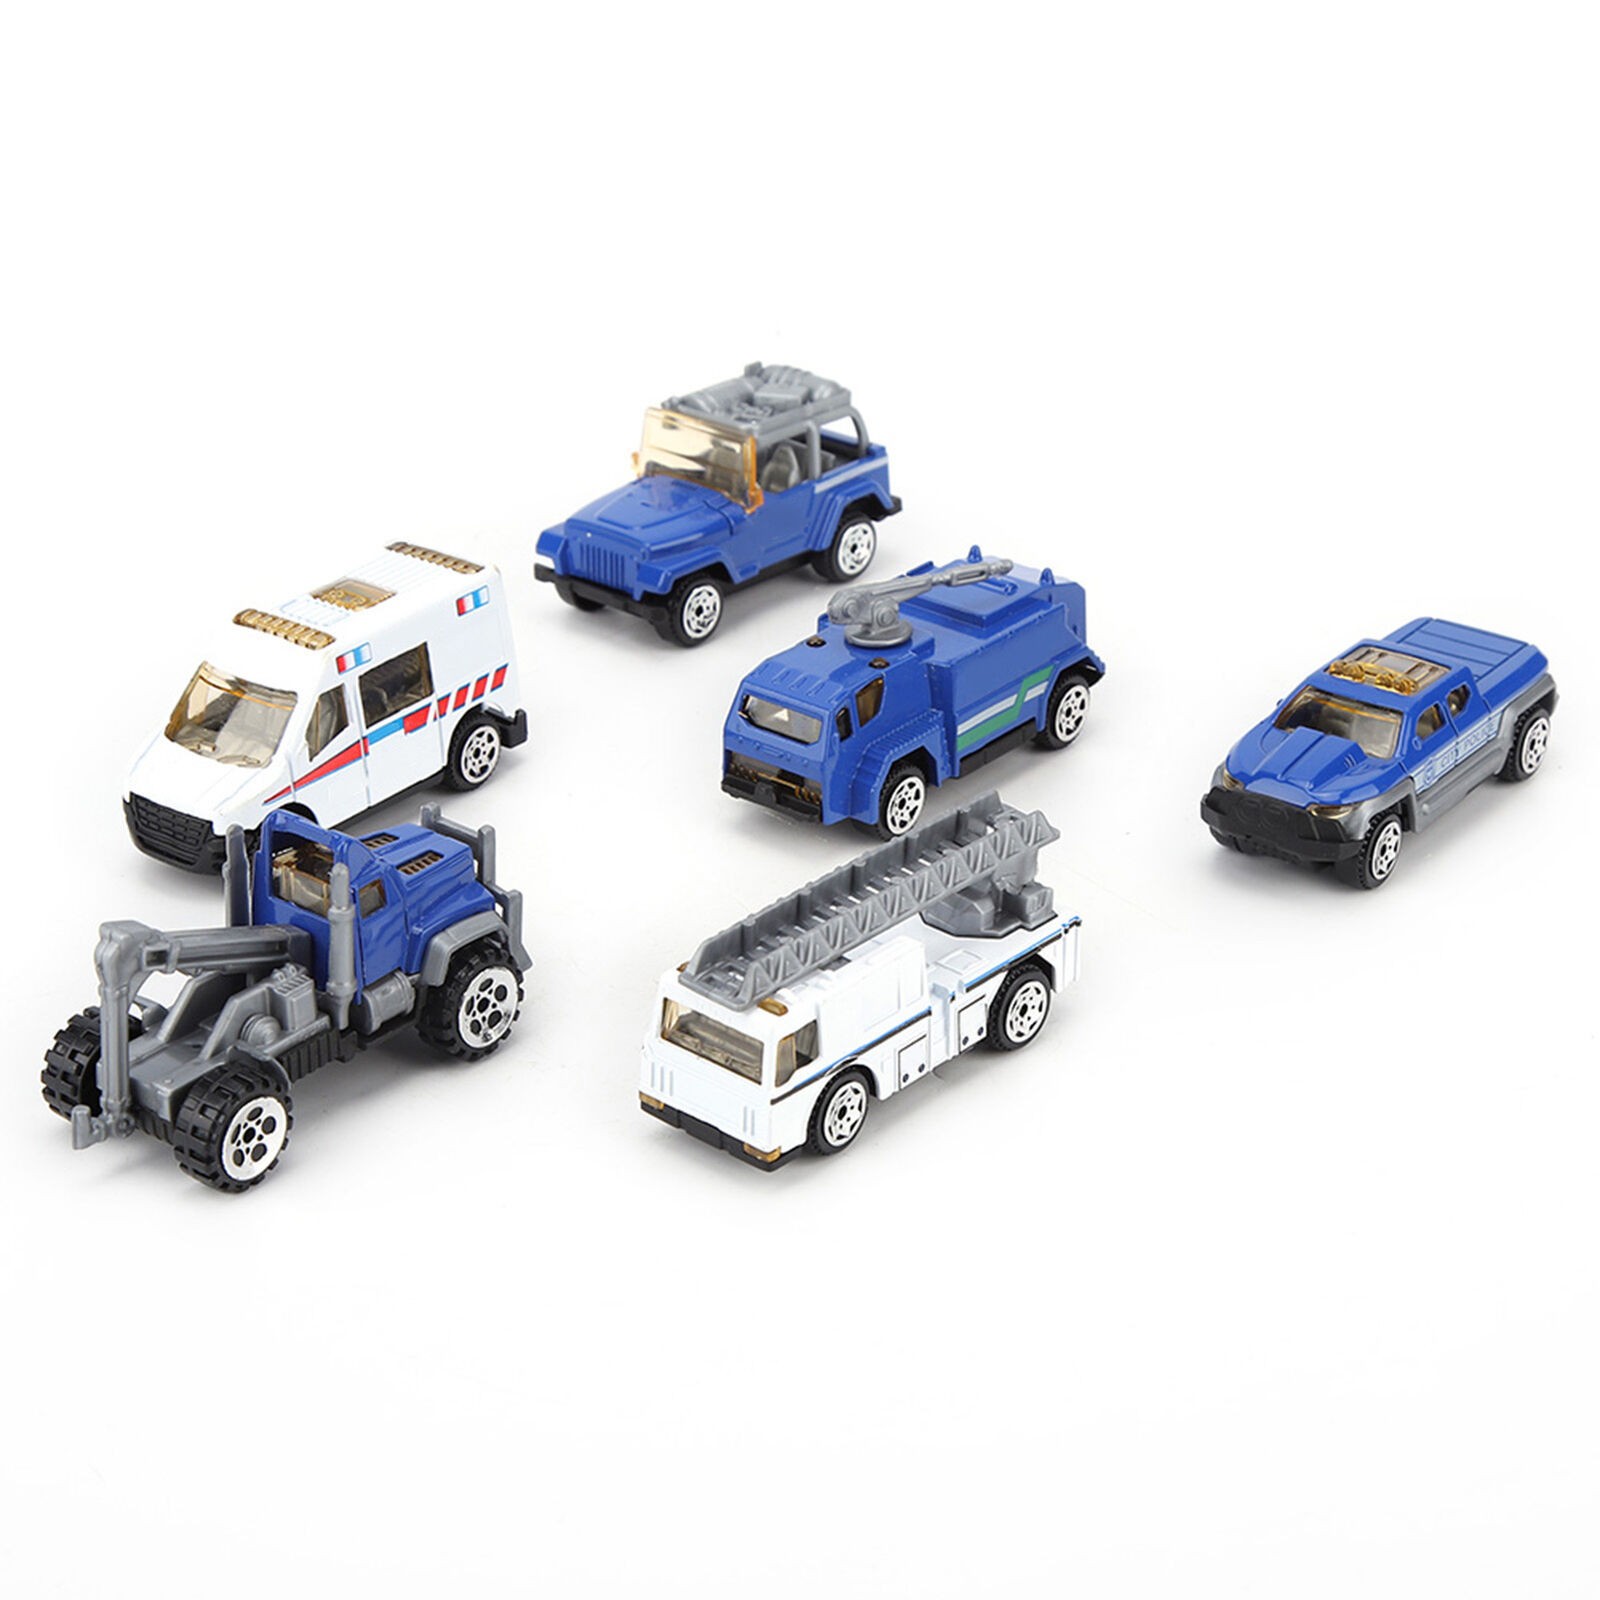 Coolerstuff 1:64 scale mini ambulance model diecast police die cast metal and alloy metal car toy